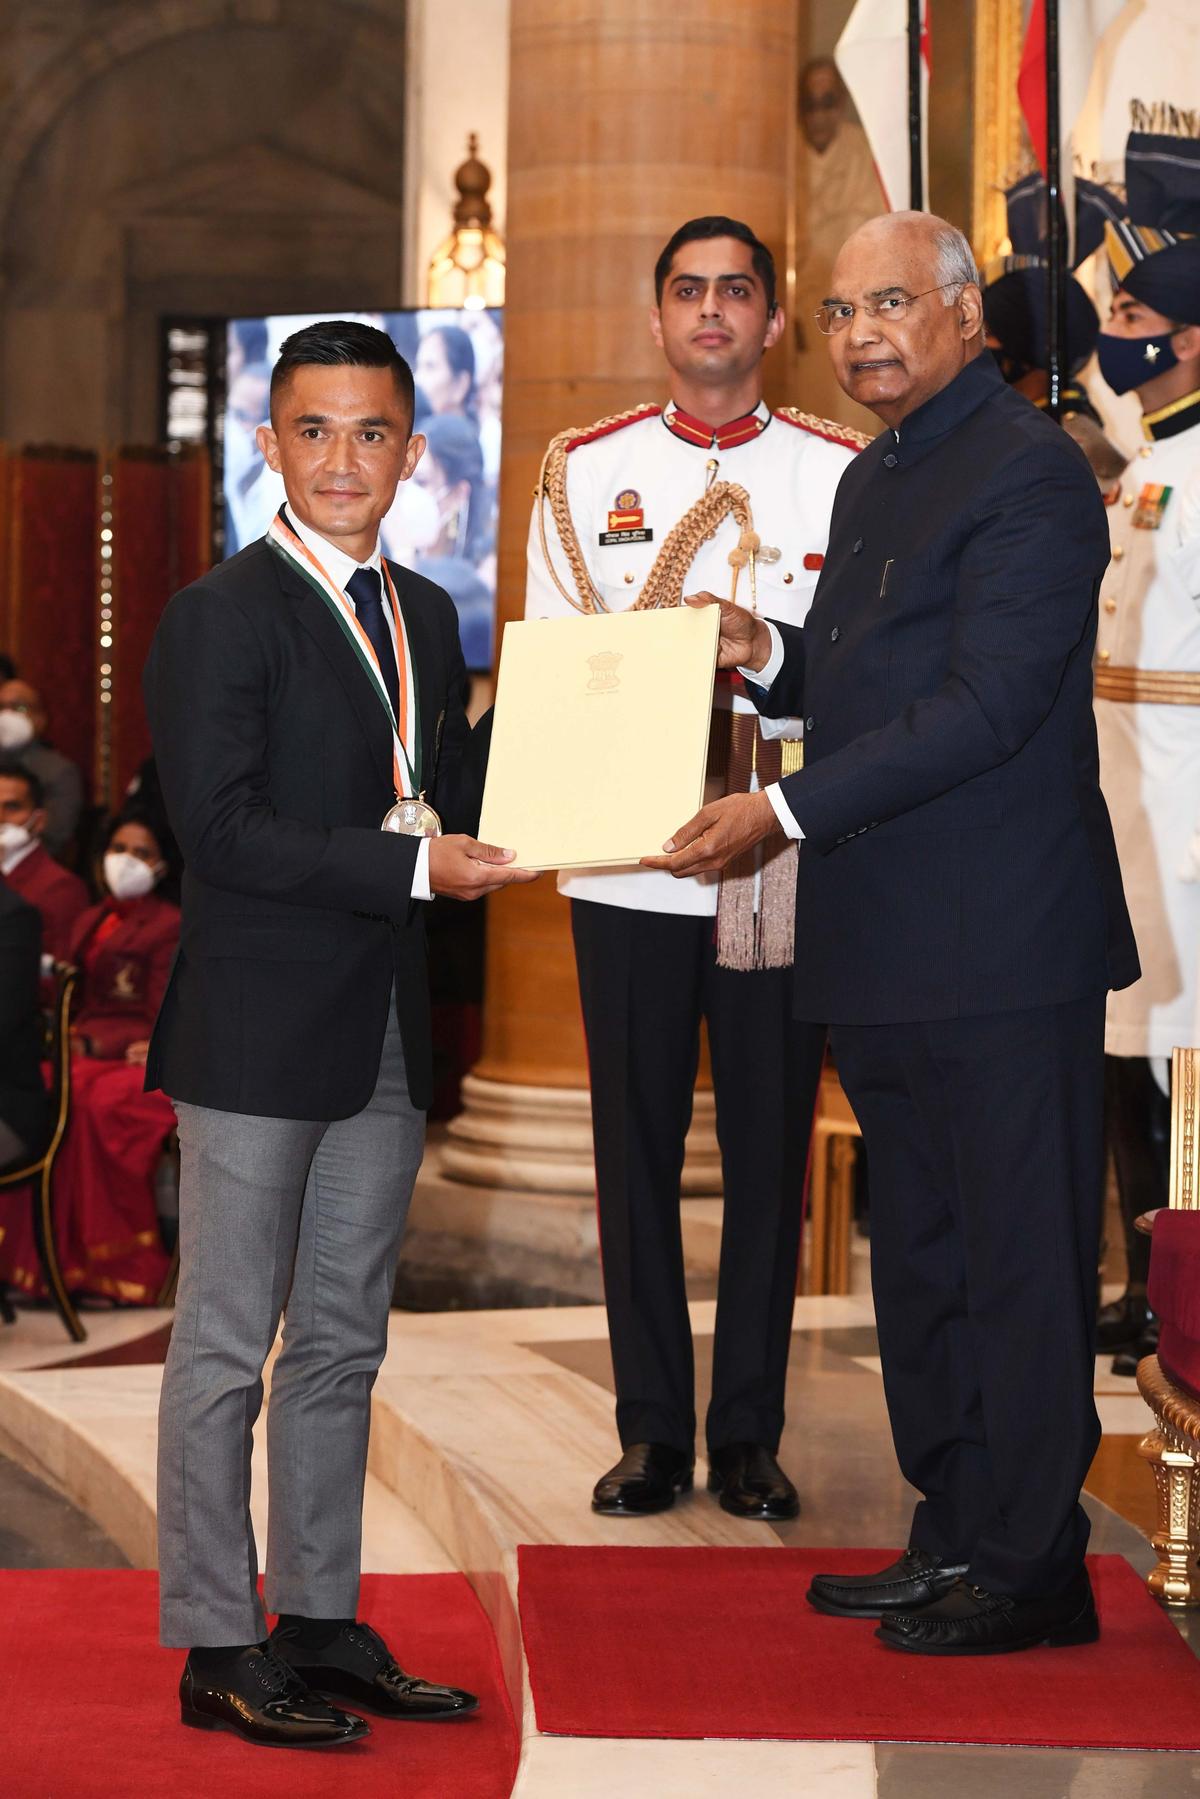 Indian footballer Sunil Chhetri receives the Major Dhyan Chand Khel Ratna award from President Ramnath Kovind on November 13, 2021, in recognition of his outstanding achievements in Football